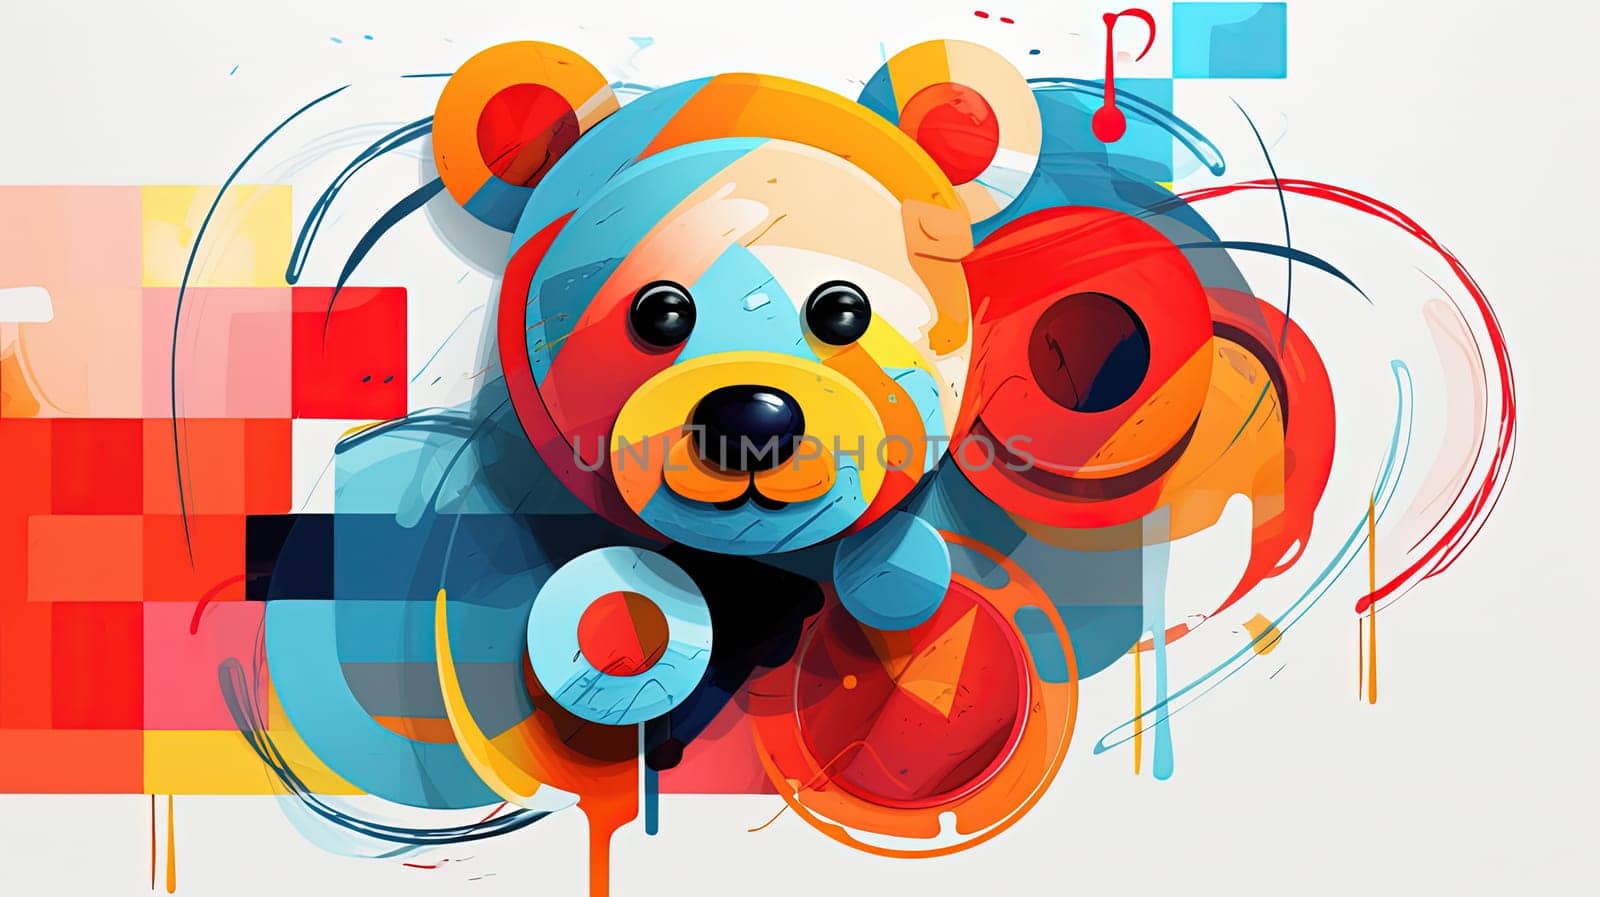 An intriguing abstract illustration of teddy bear